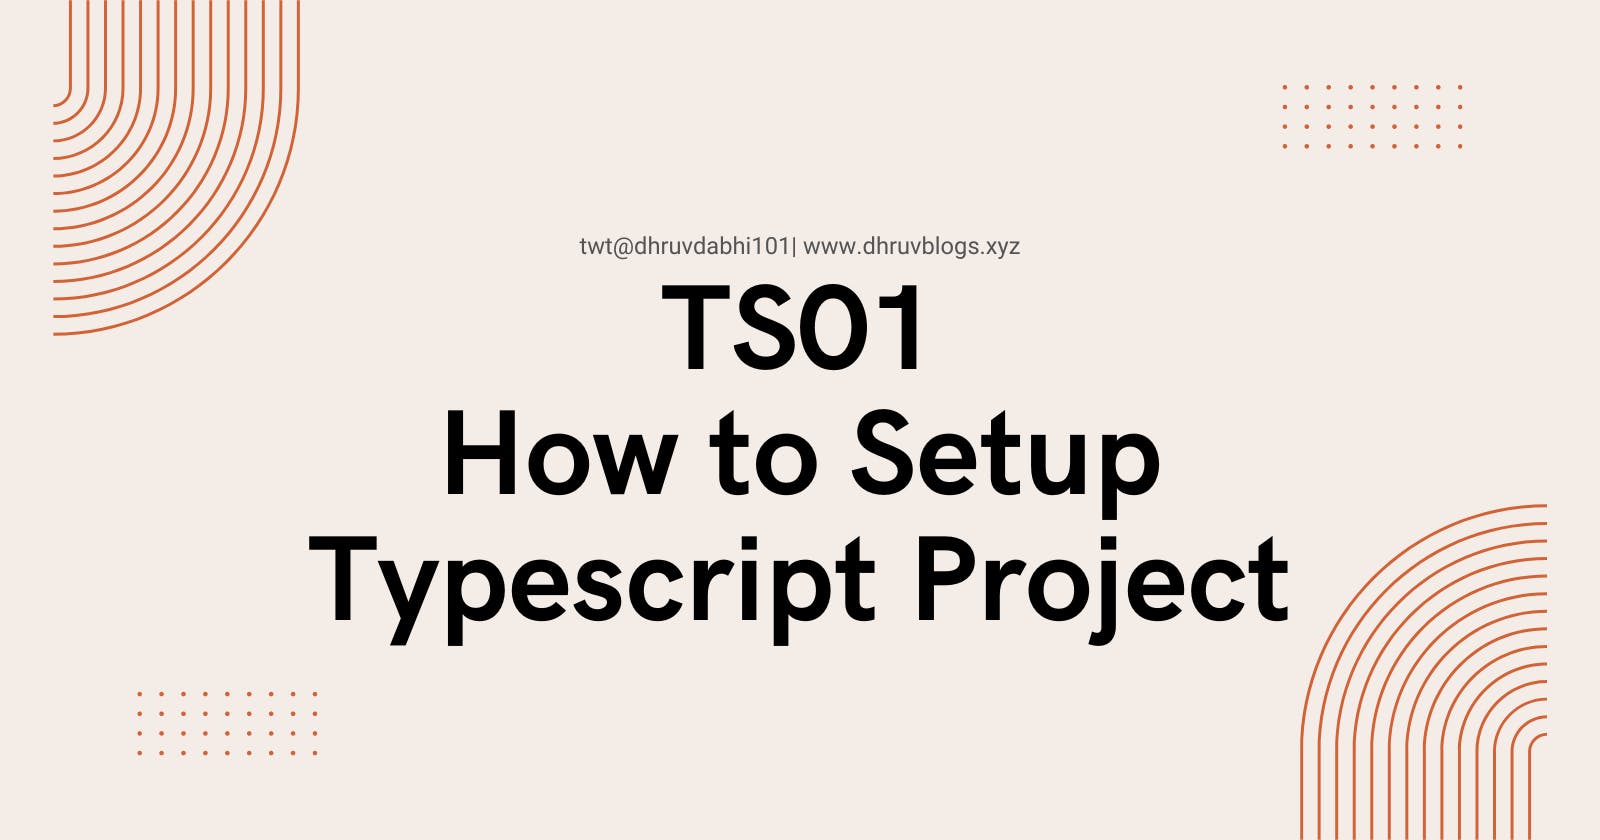 TS01 : How to Setup Typescript Project